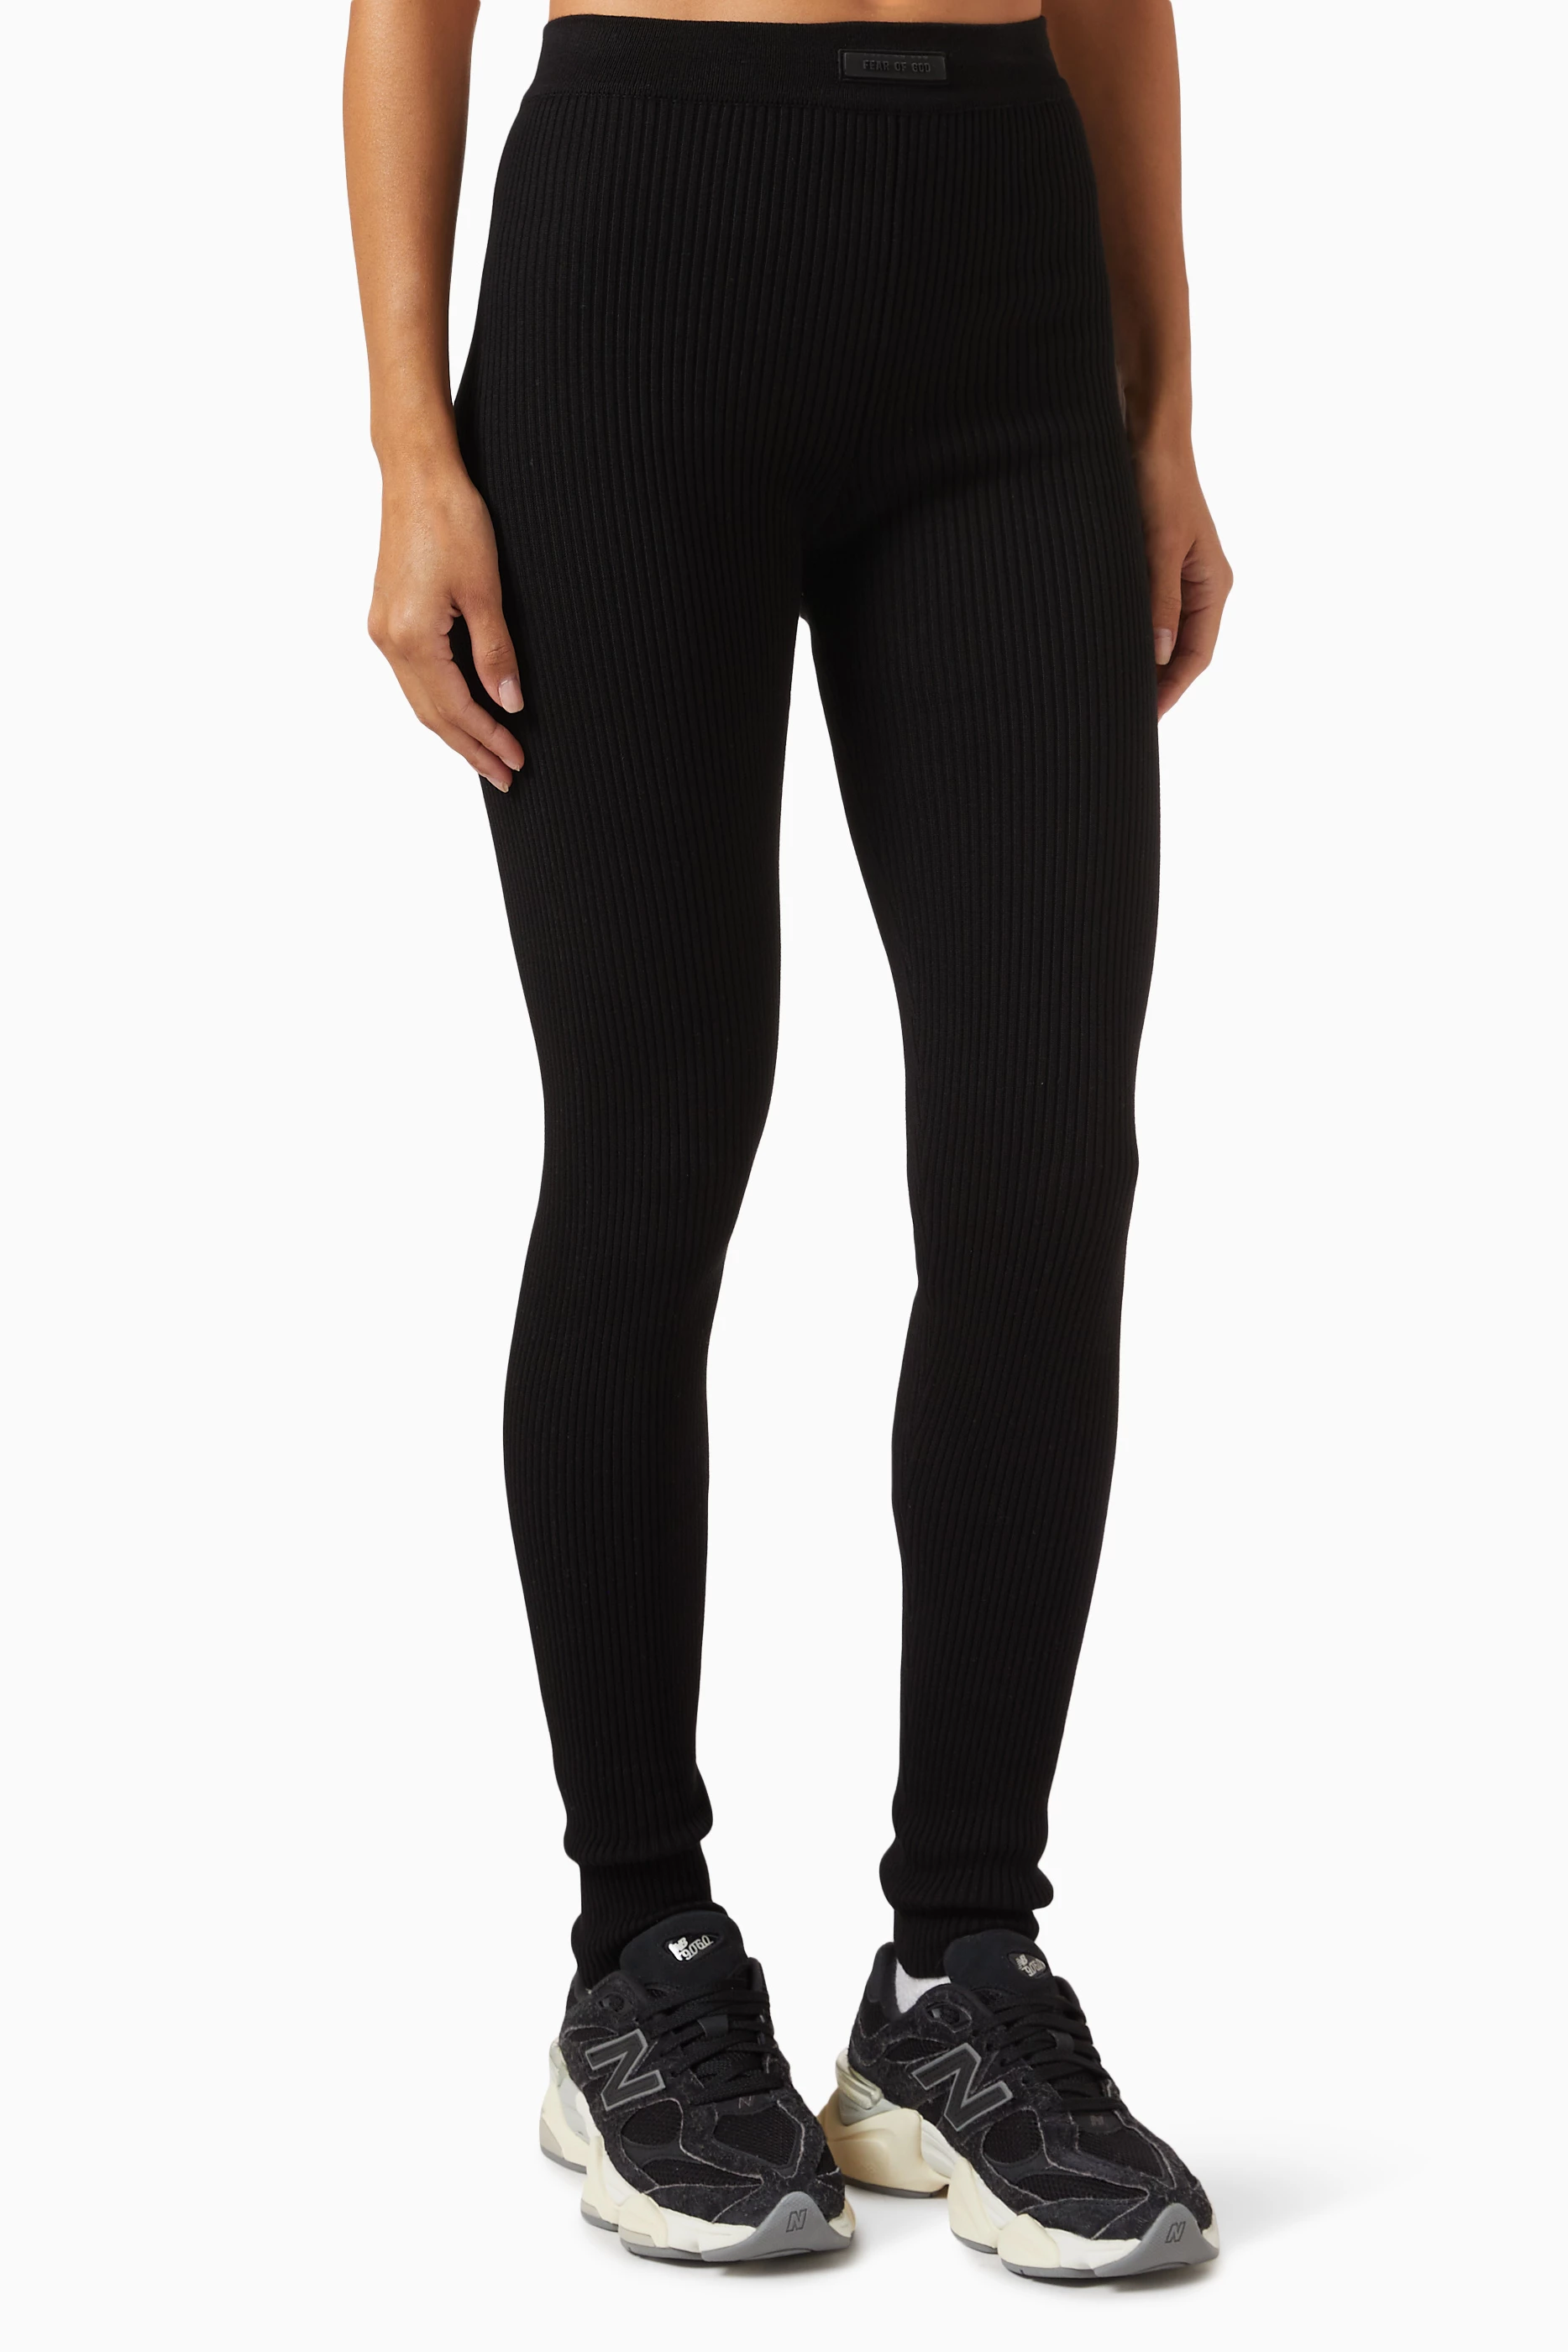 Buy Fear of God Essentials Black Ribbed Leggings in Cotton-blend